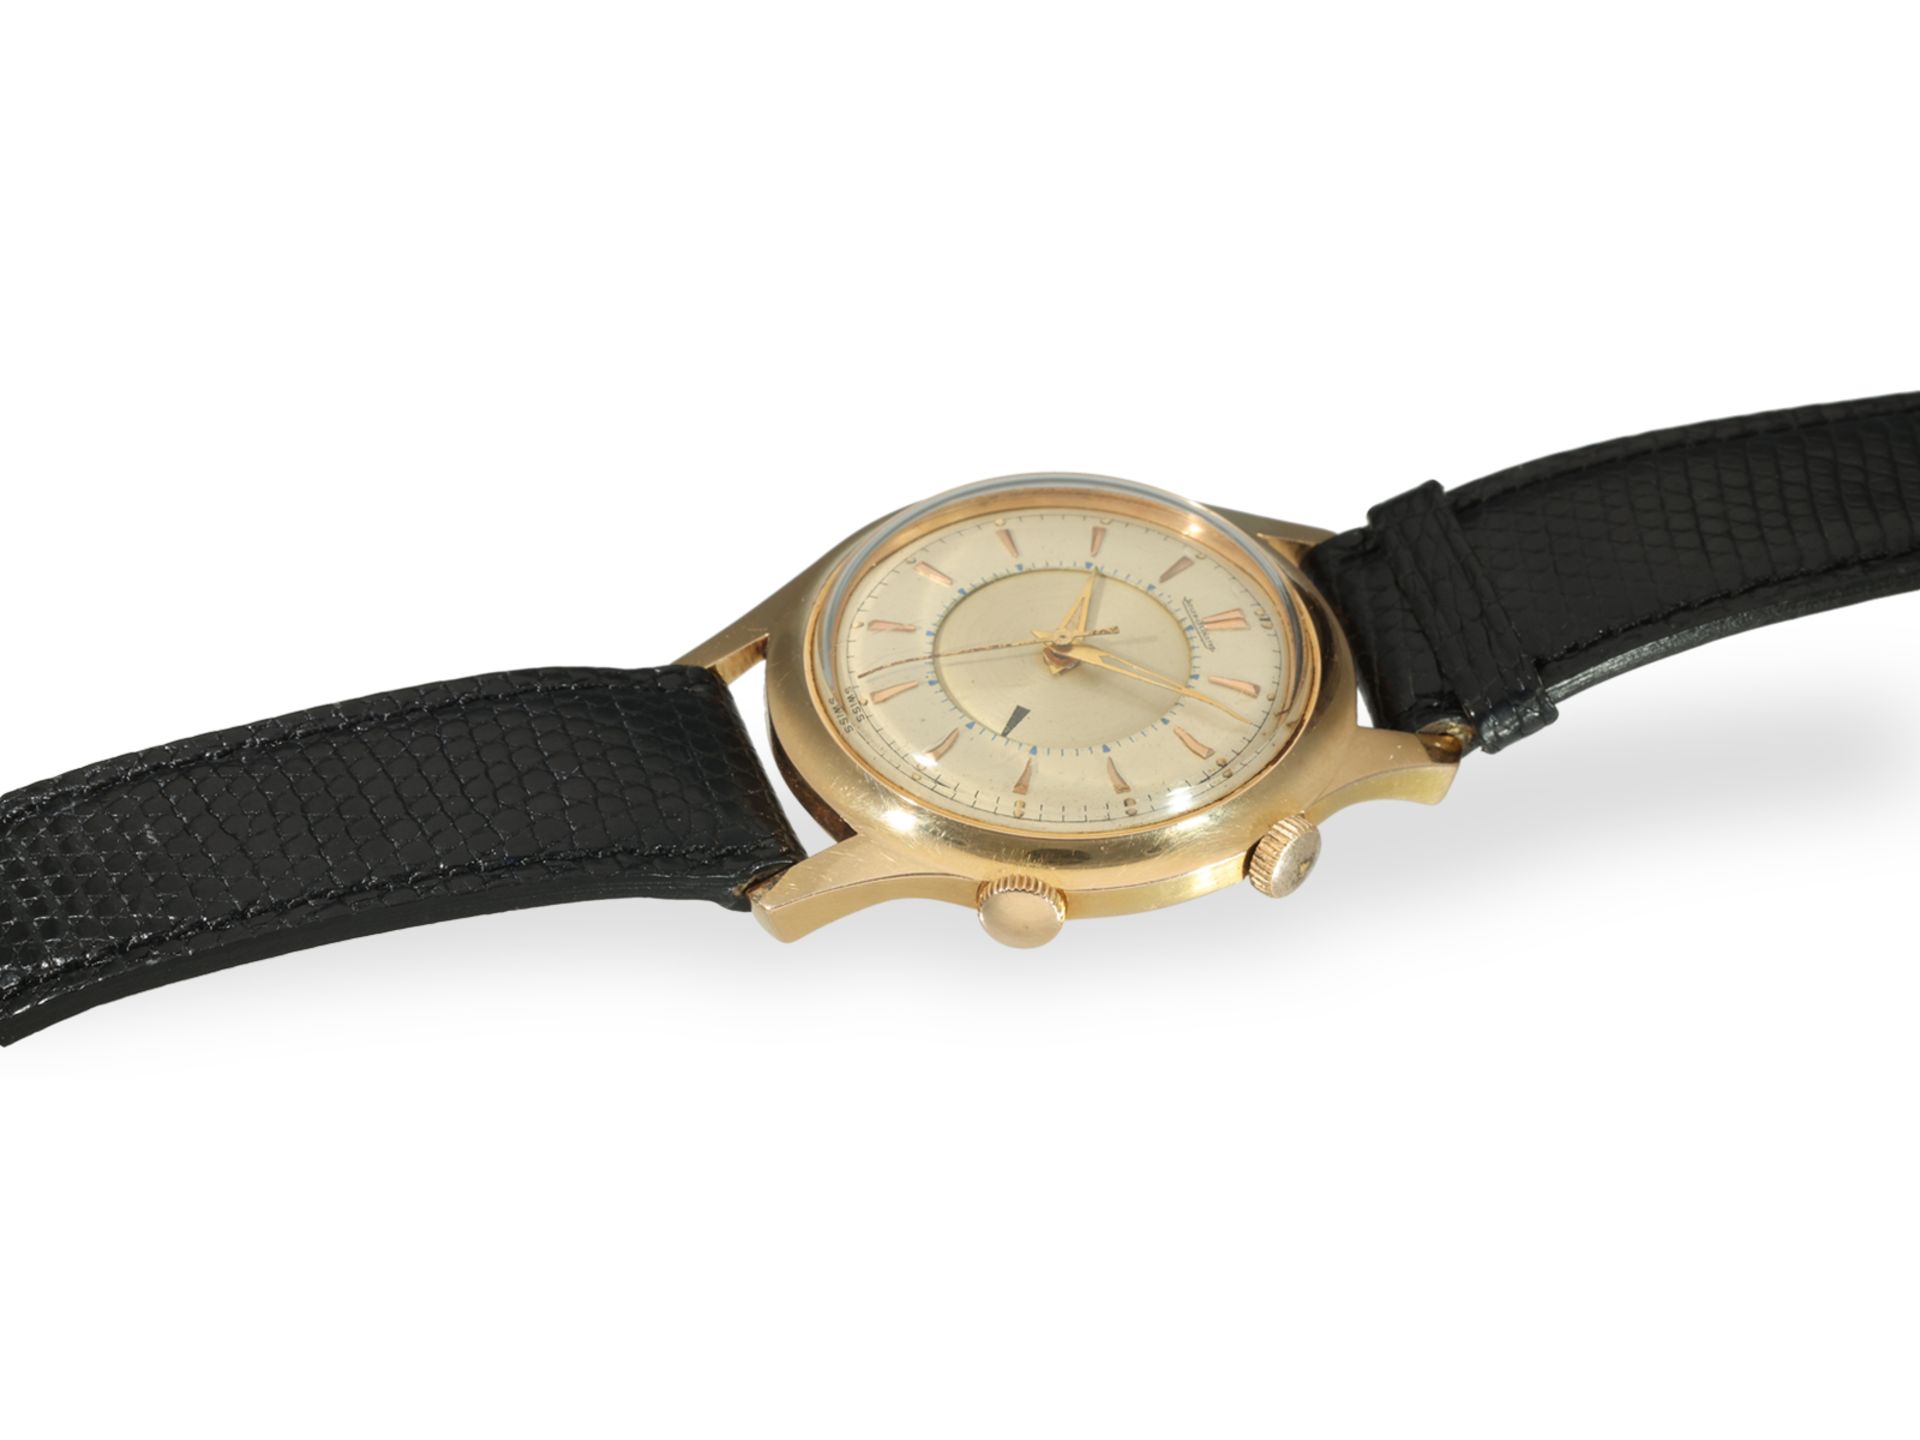 Wristwatch: Jaeger Le Coultre Memovox Ref. E852 "Pink-Gold", full set from 1961 - Image 5 of 7